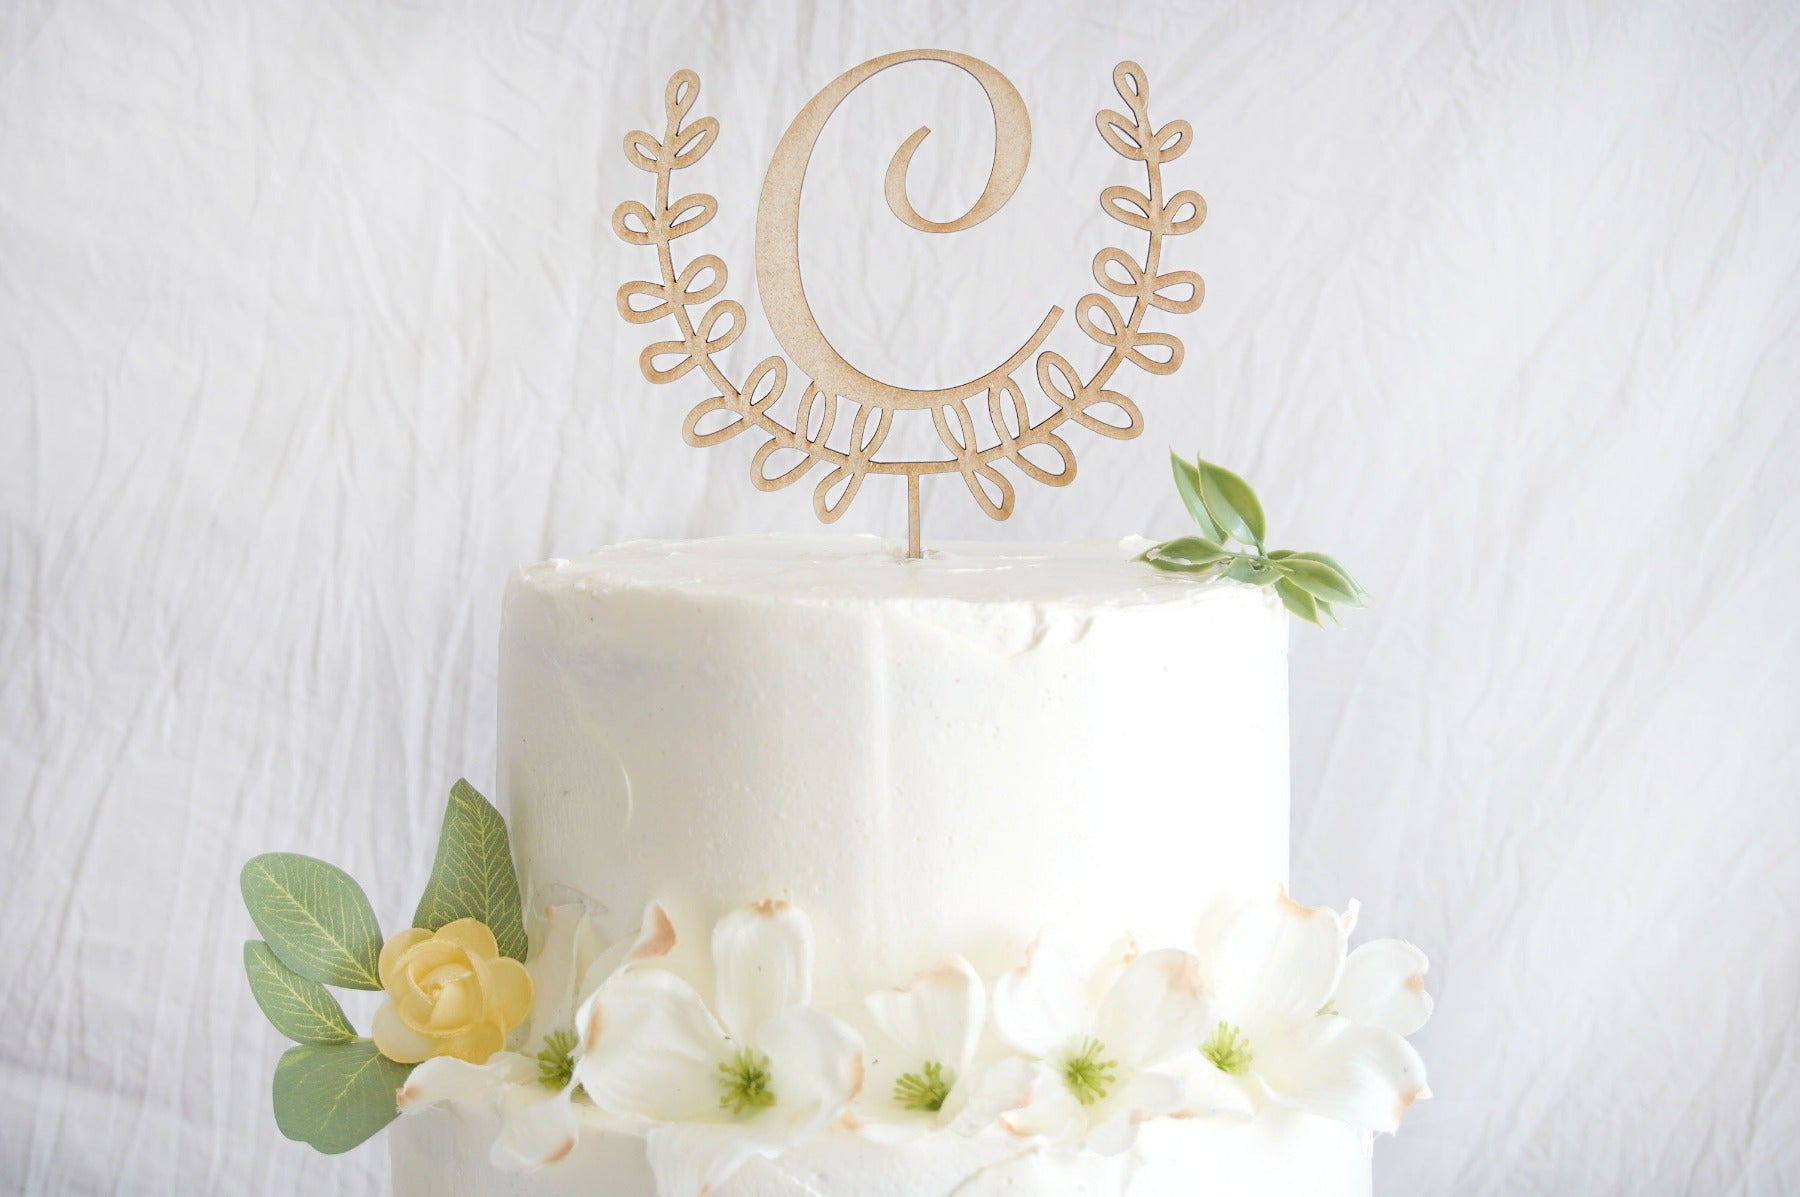 Laurel Wreath Wedding Cake Topper | Custom Cake Topper Personalized | Acrylic or Wood Cake Topper, Cake Toppers, designLEE Studio, designLEE Studio